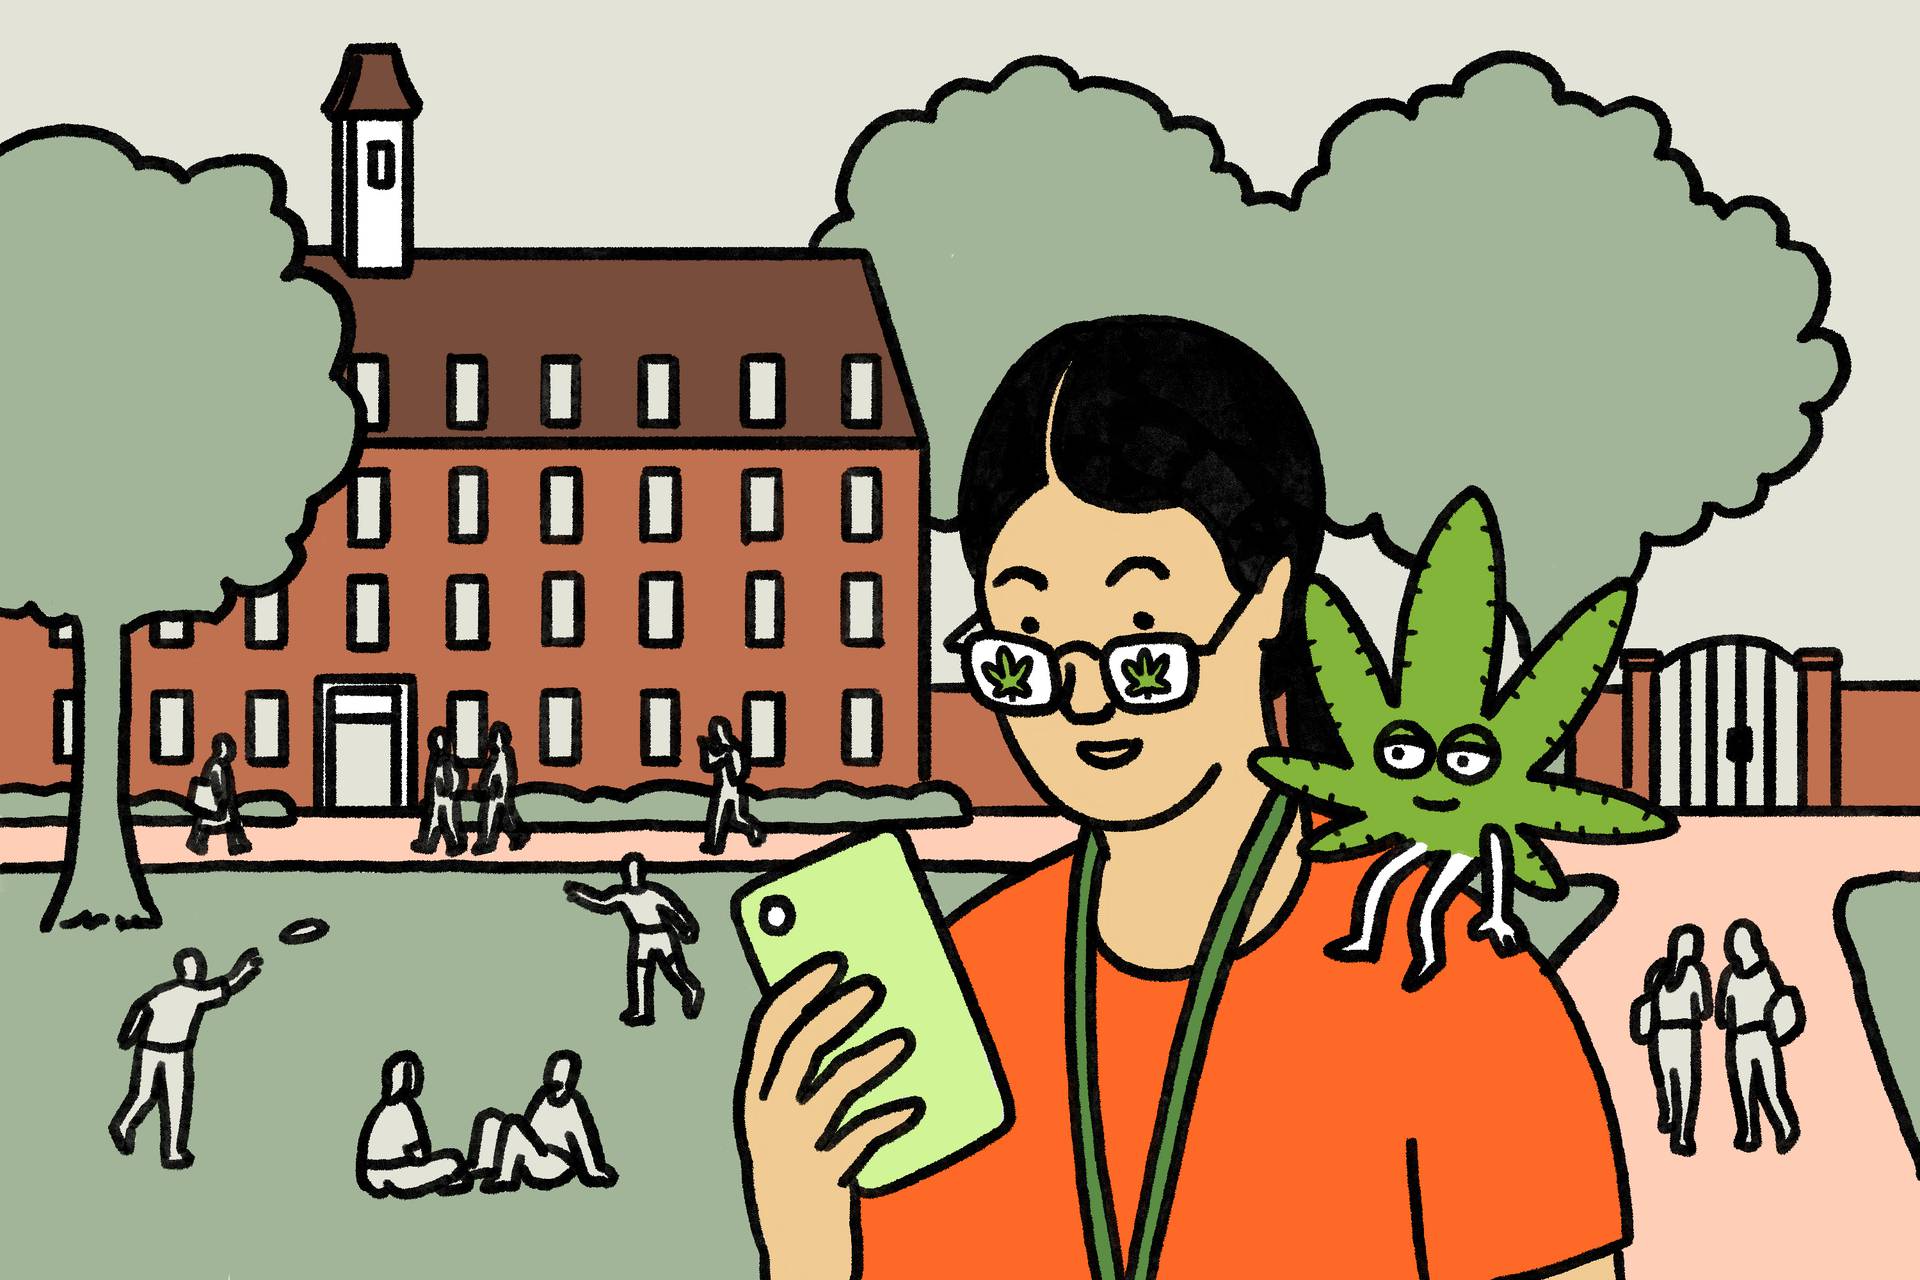 Illustration of female college student with lanyard around neck, looking at phone, with cannabis leaf perched on her shoulder and cannabis leaves reflected in her glasses. In the background is a large brick colonial-style building, a lawn with students walking, playing frisbee, and sitting around.